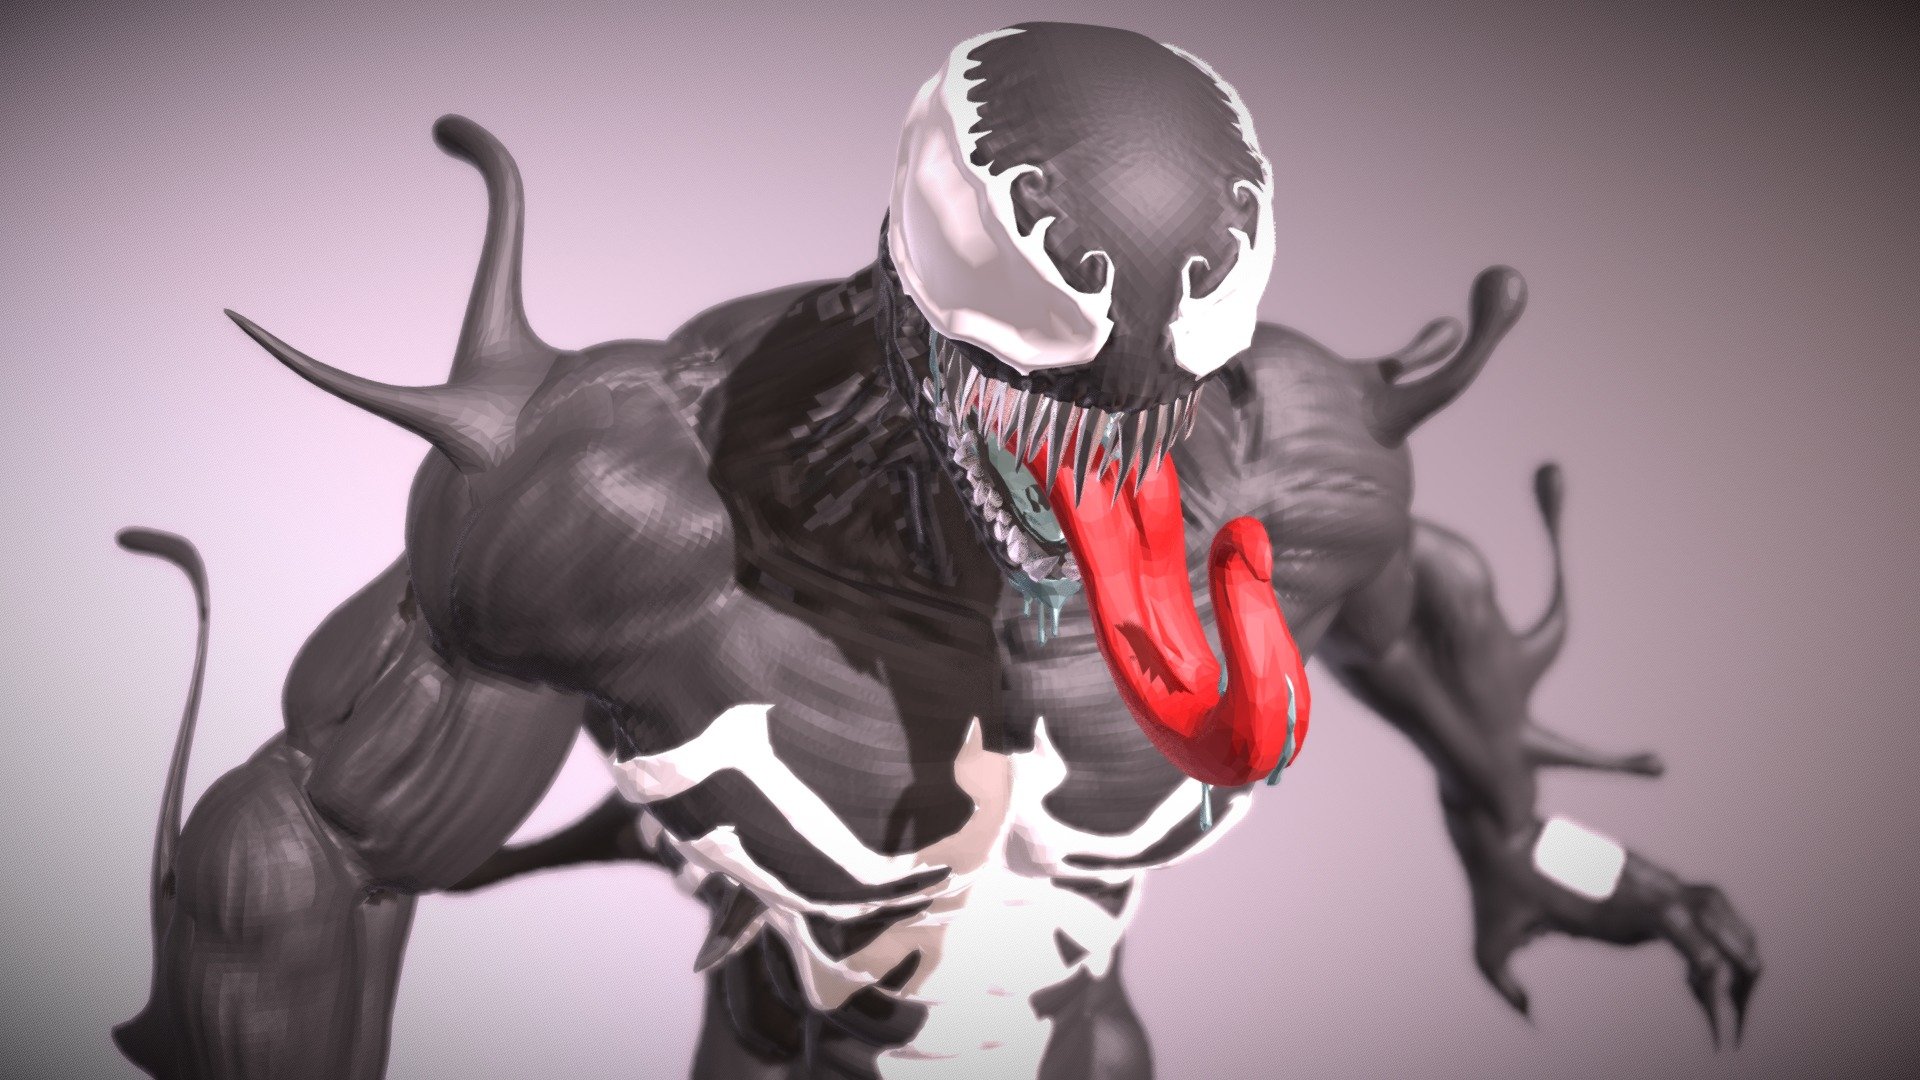 So I have started off with zbrush and been loving it. Venom got developed during a male human anatomy study and i kind of got hooked to it :p
For more detailed images:-

https://www.artstation.com/artwork/xbvm1 - Venom - Eddie Brock - 3D model by vnayakvelu 3d model